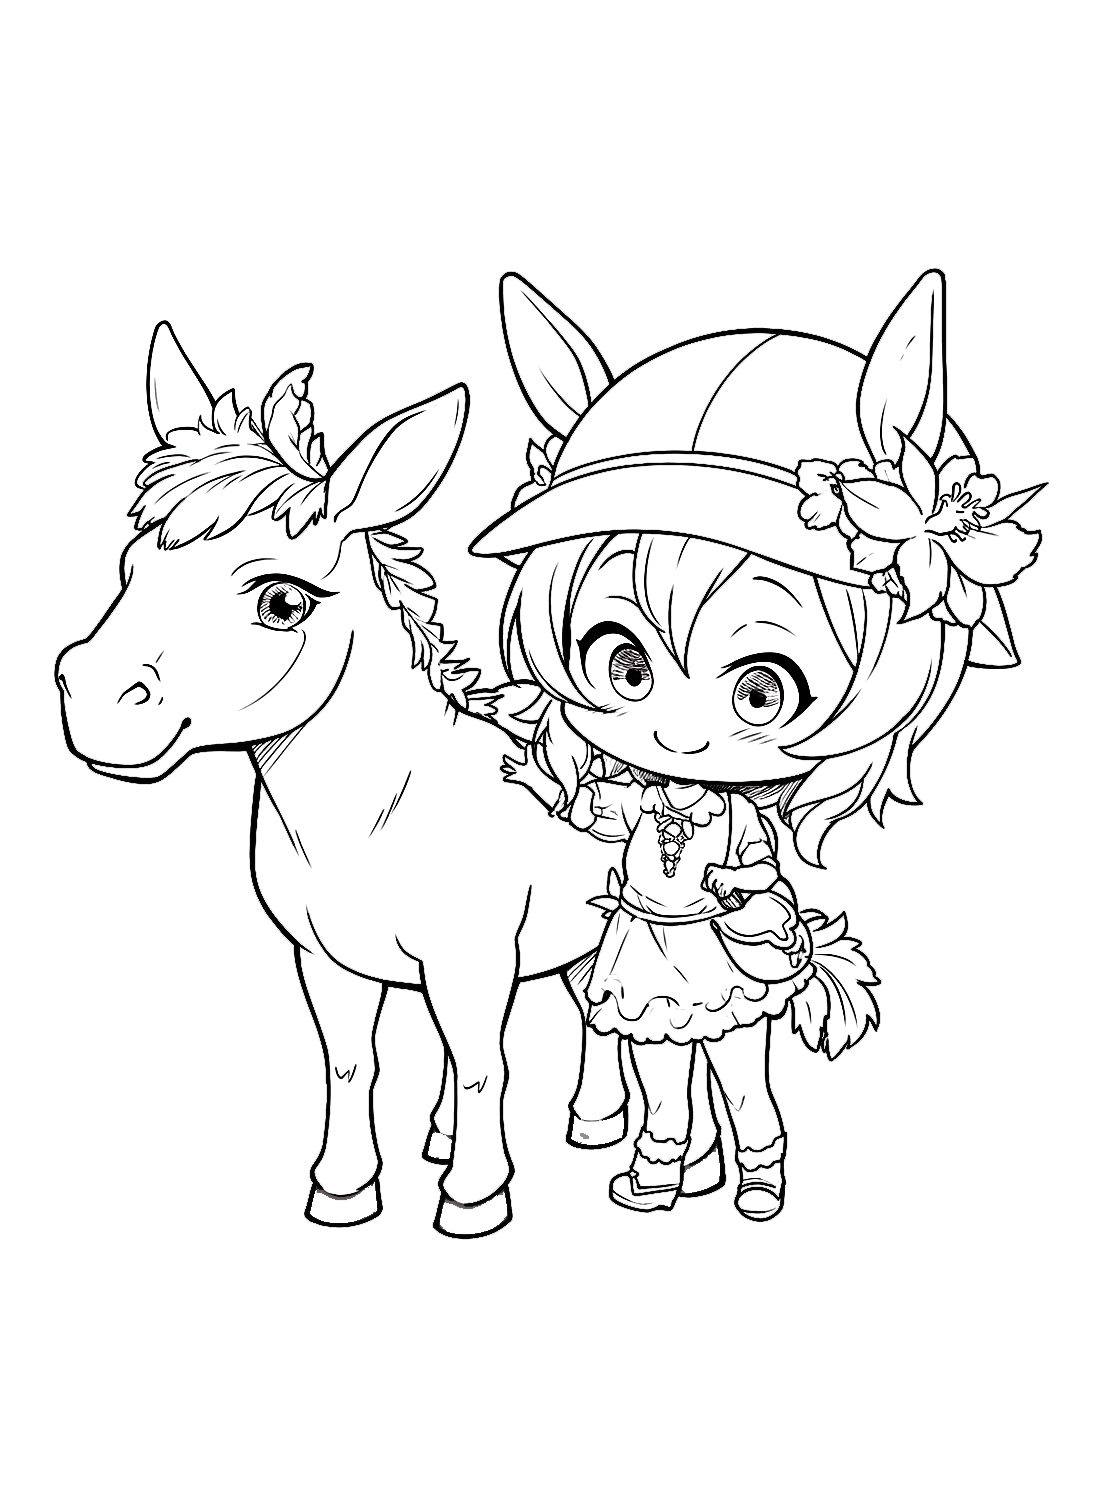 Donkey and a kid Coloring Page